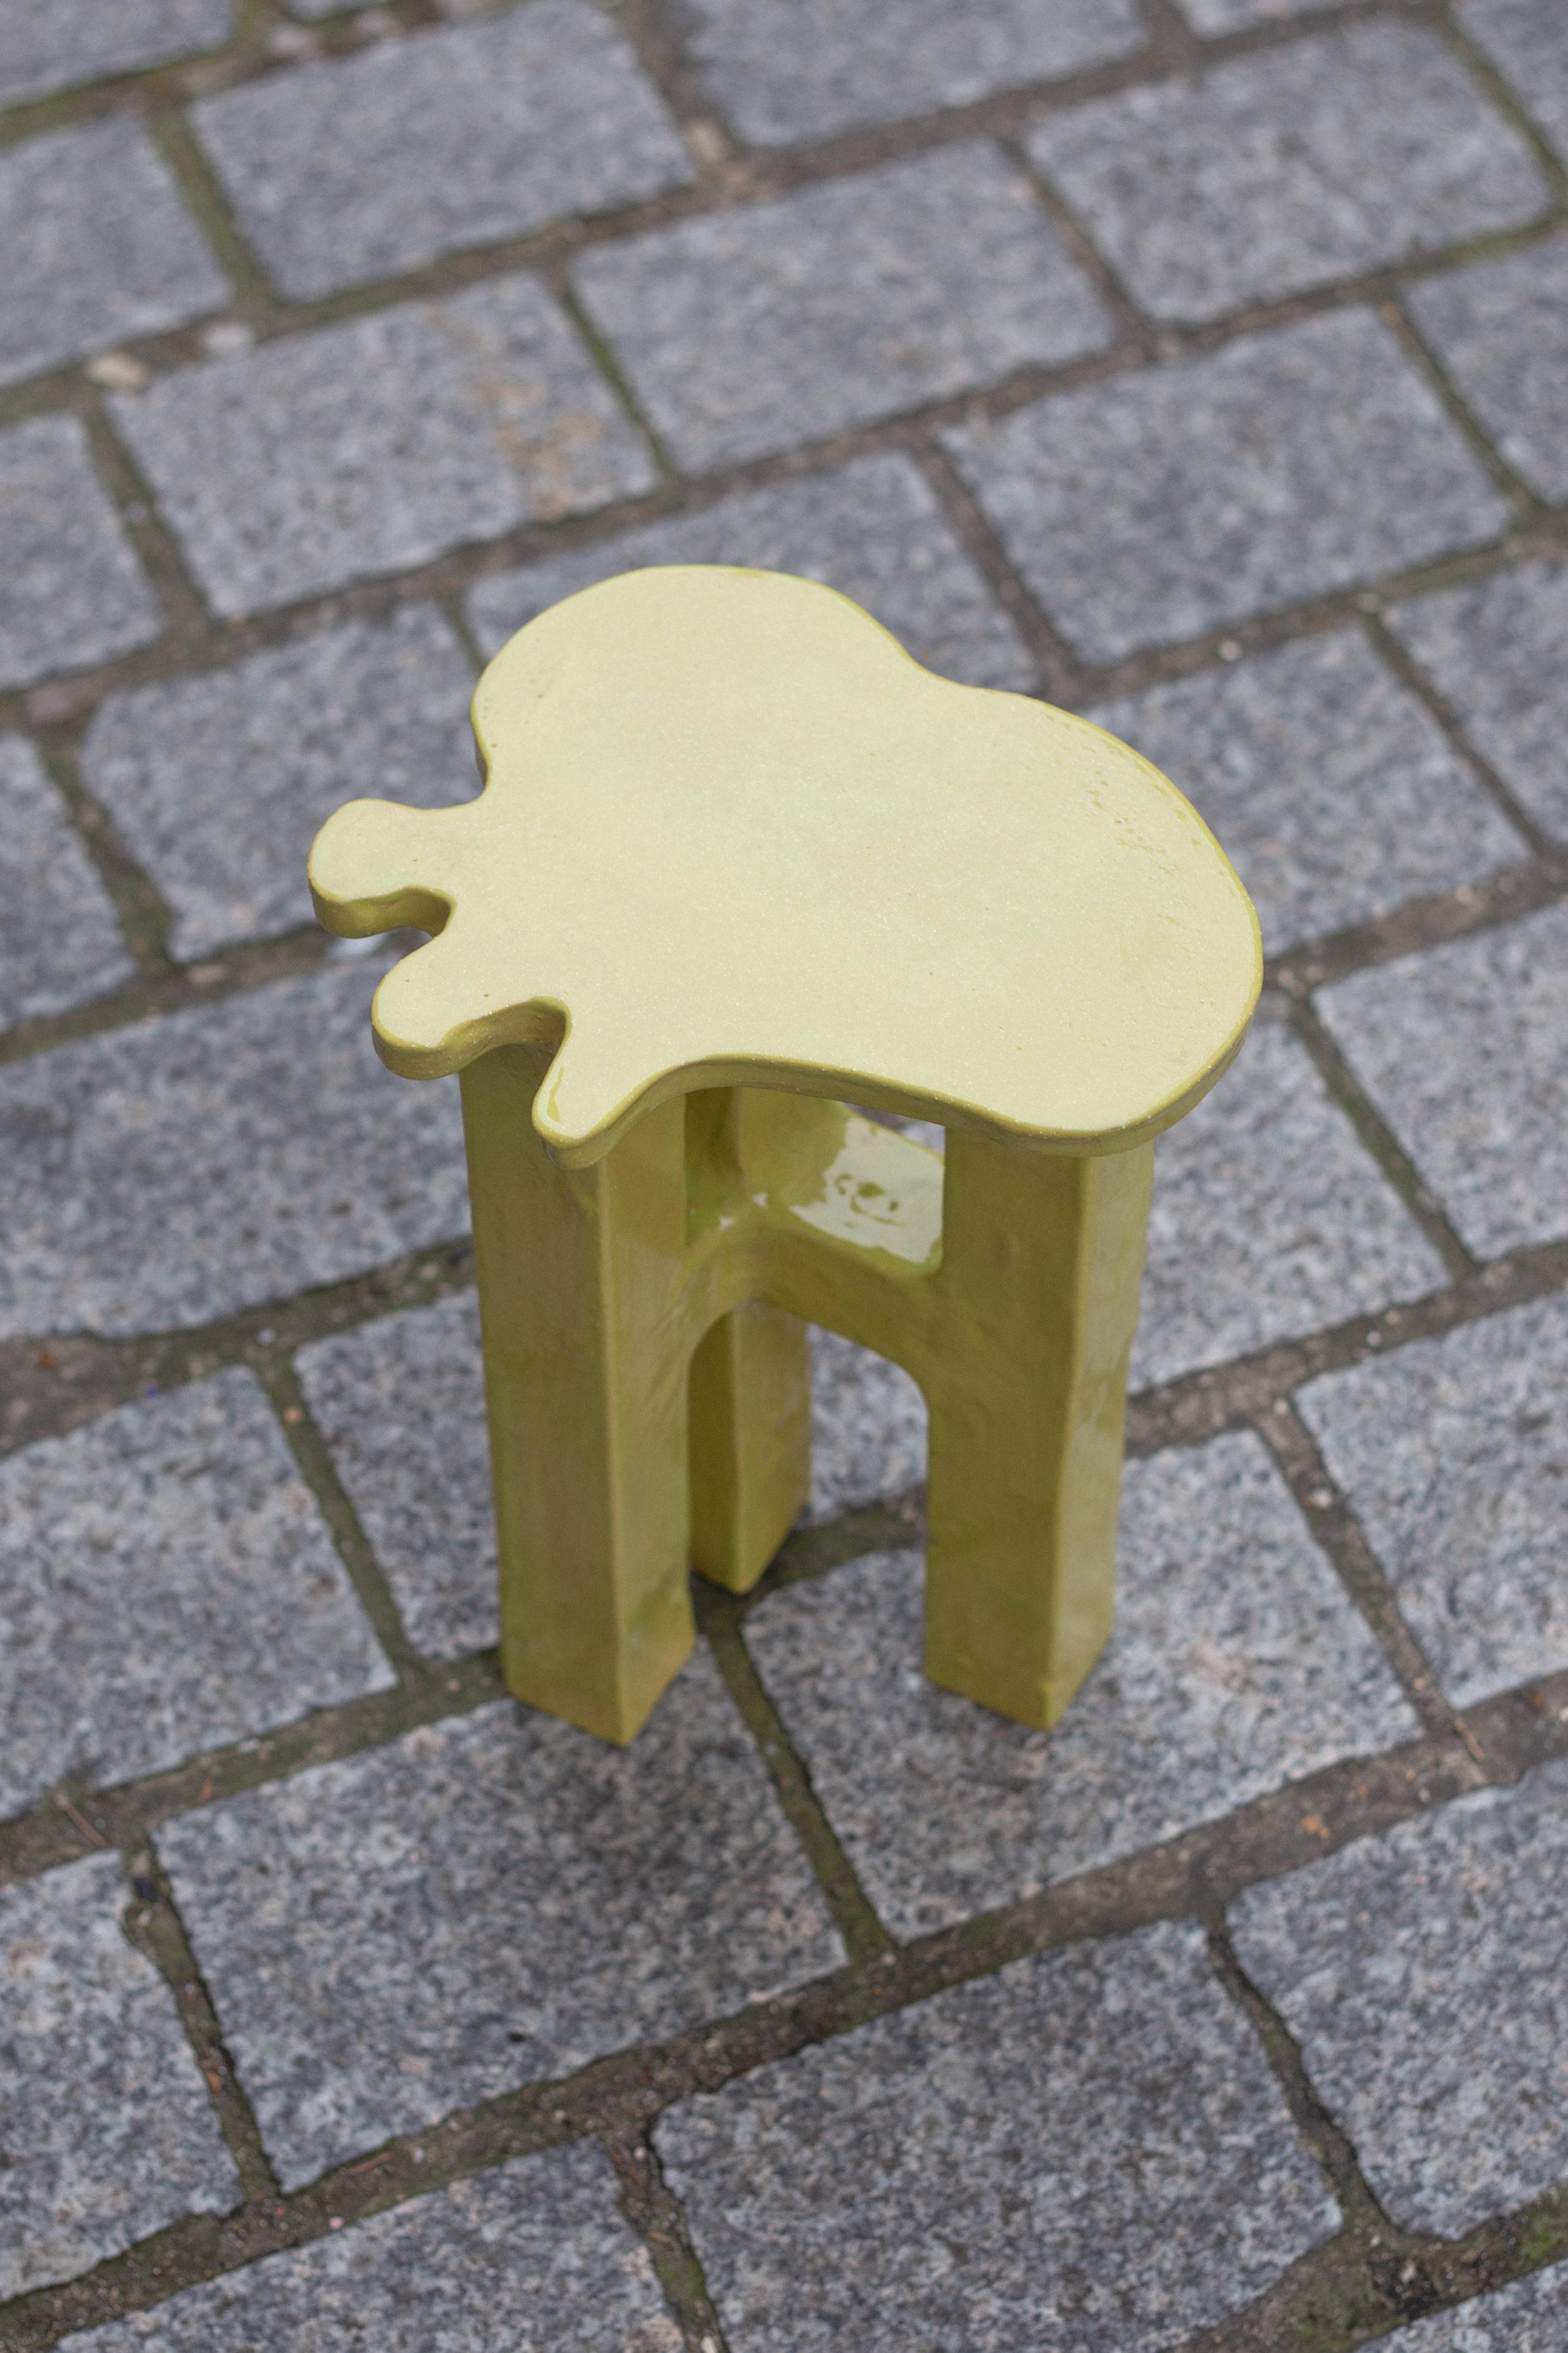 Unique Yellow Stoneware Splash Stool by Mesut Öztürk
Dimensions:  W 24 x D 22 x  H 40 cm
Materials: Stoneware

Splash side tables are the outcomes of the experiments for an aesthetic pursuit on coupling of contradictions: Minimal designs with